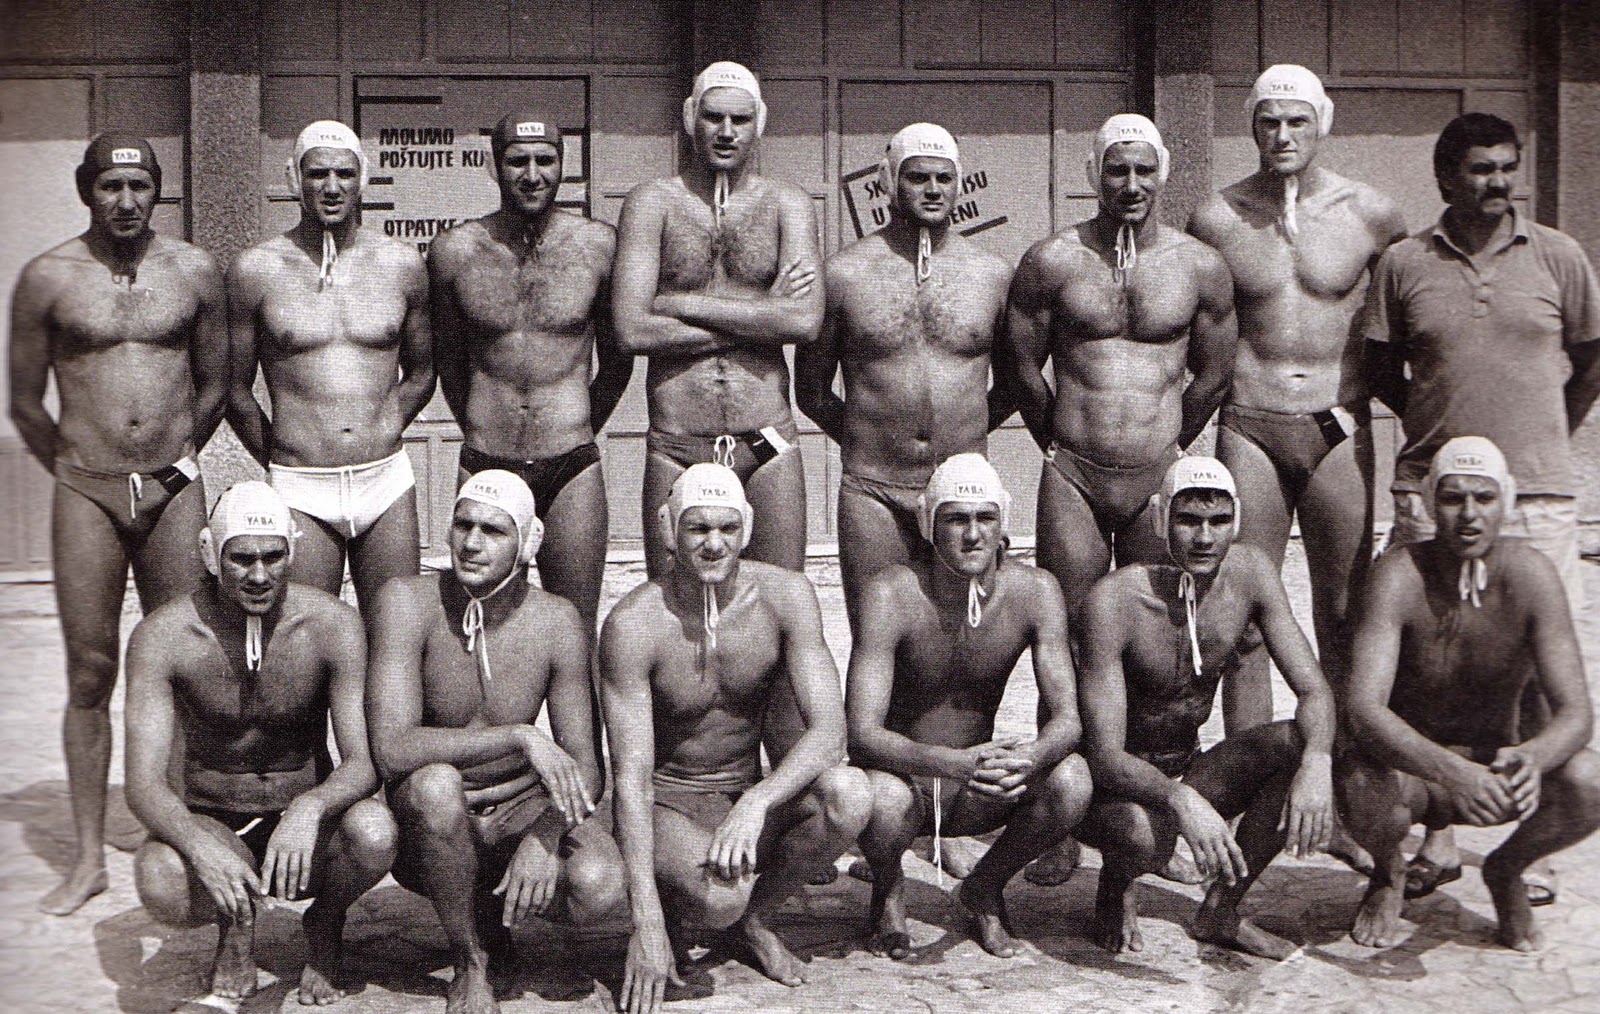 Water Polo legends: 1986, Madrid: The golden team of Yugoslavia